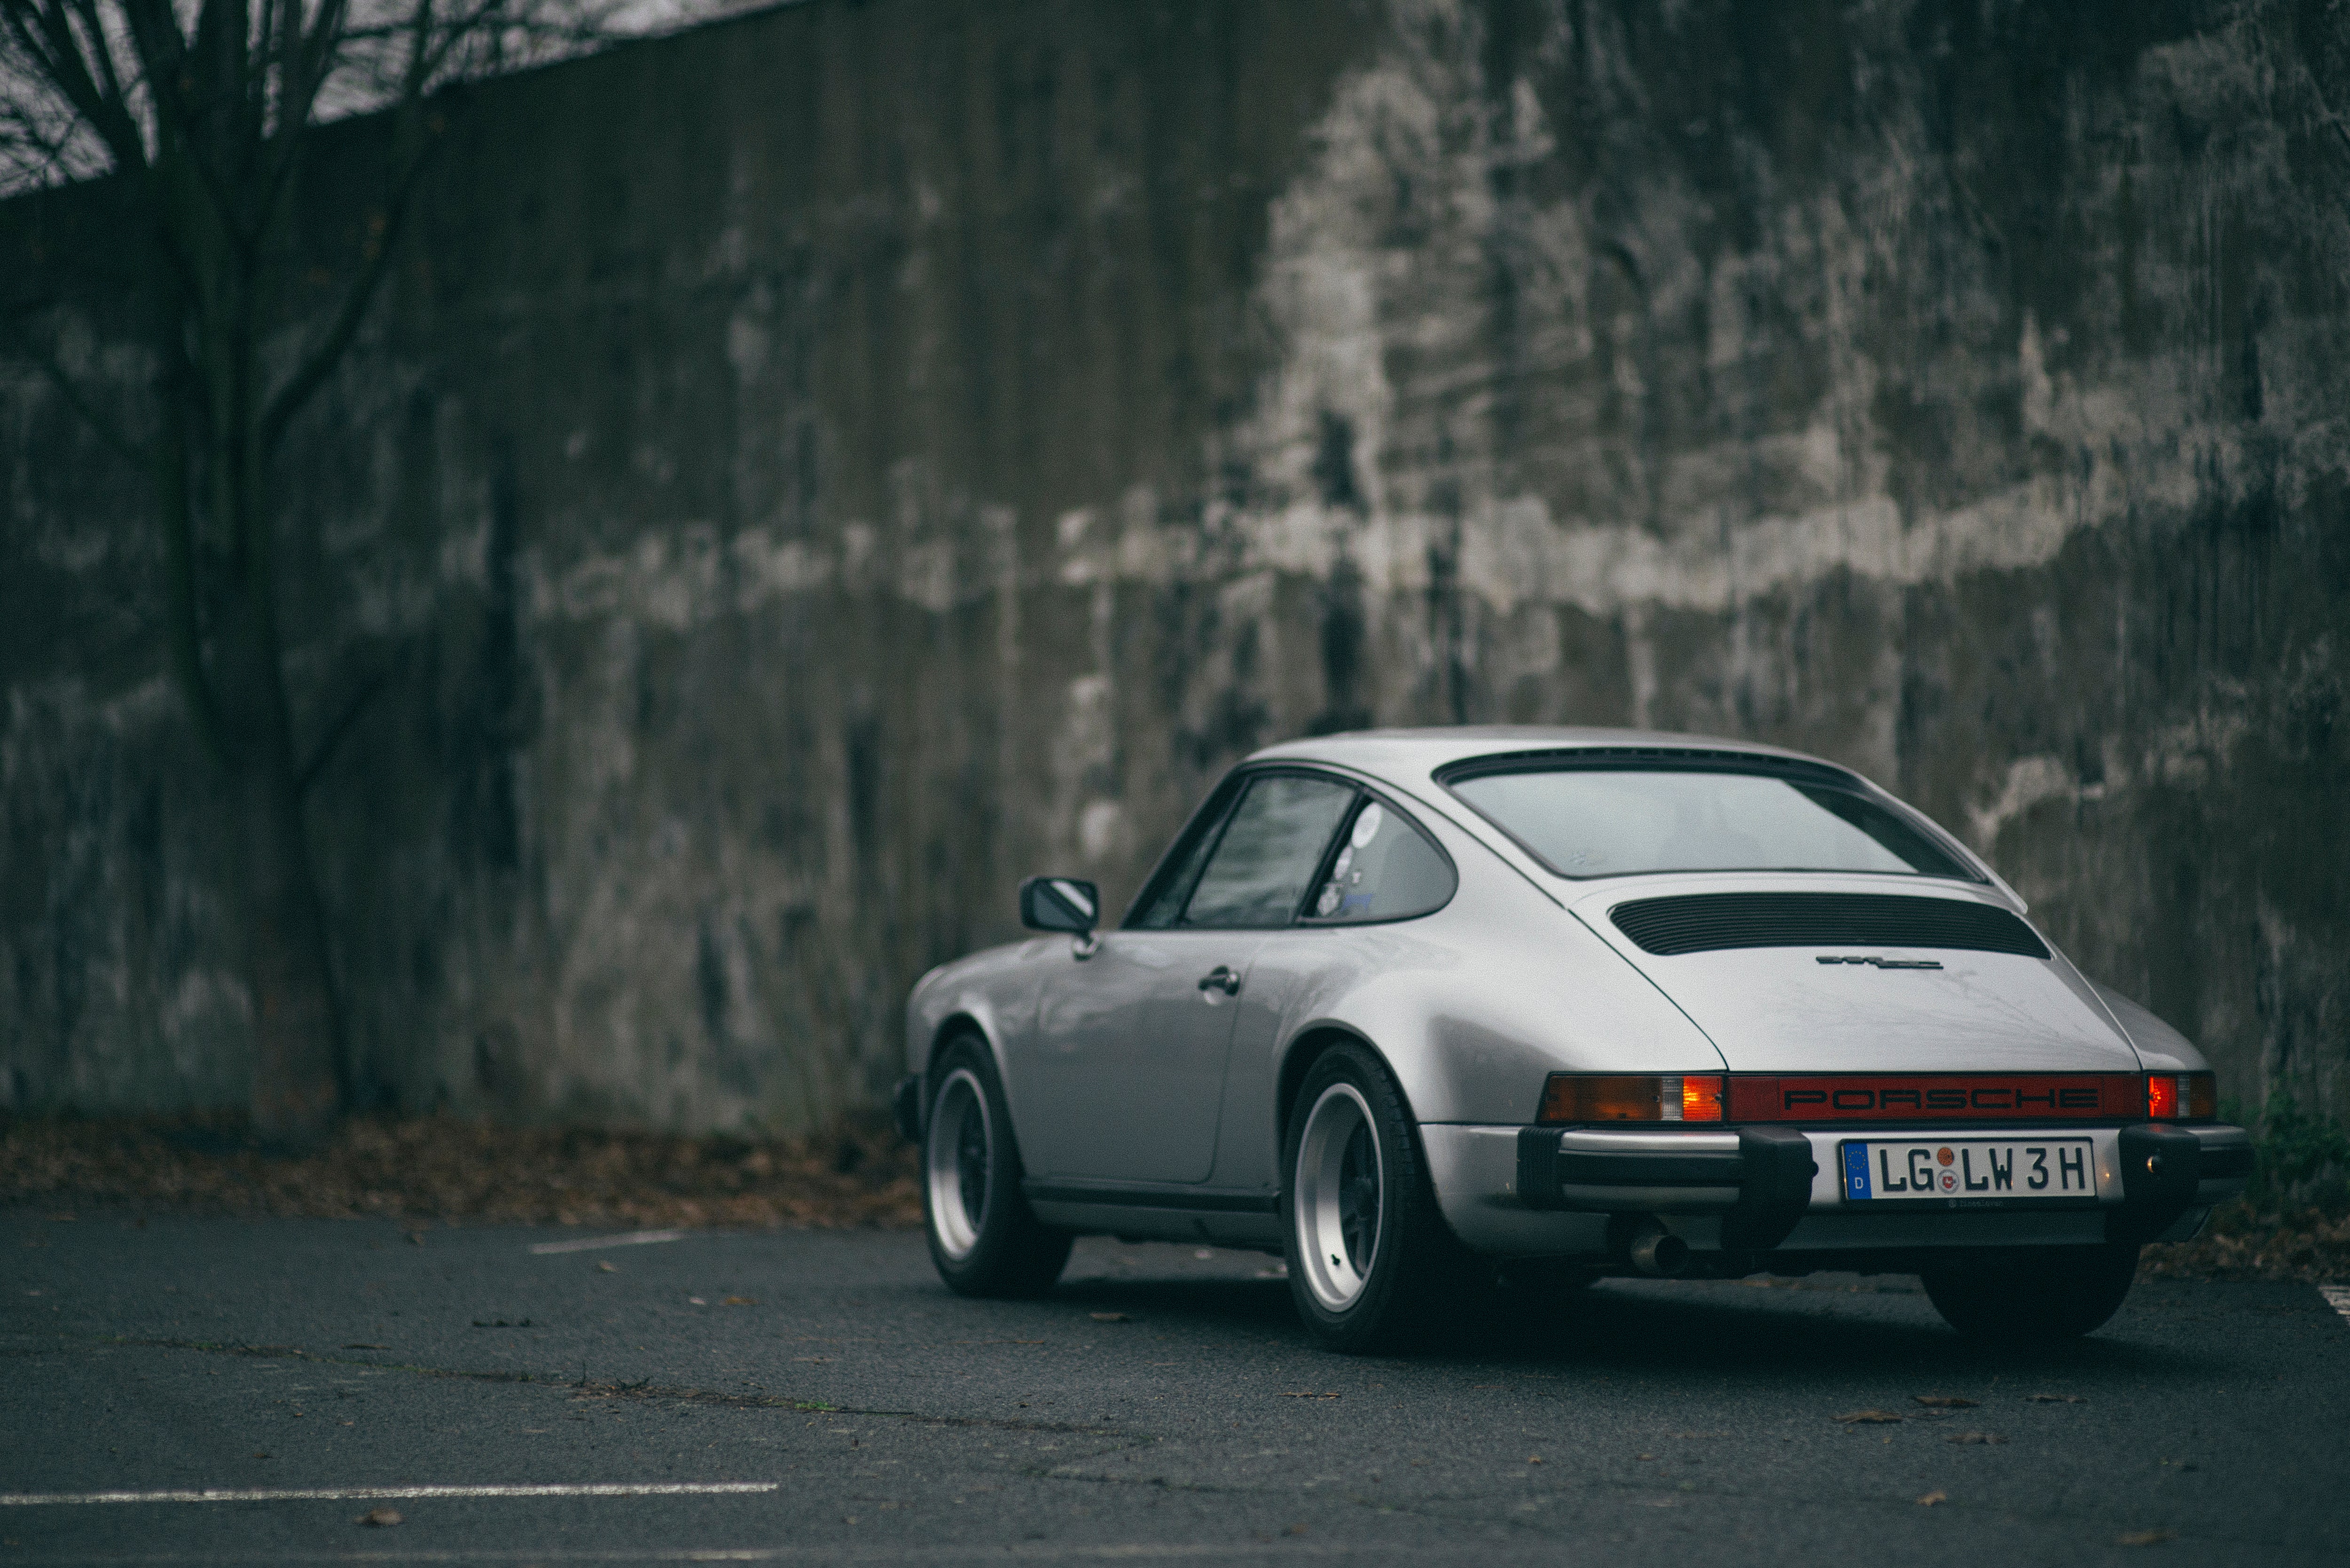 Porsche took three years to bring this barn find 911 back from the dead